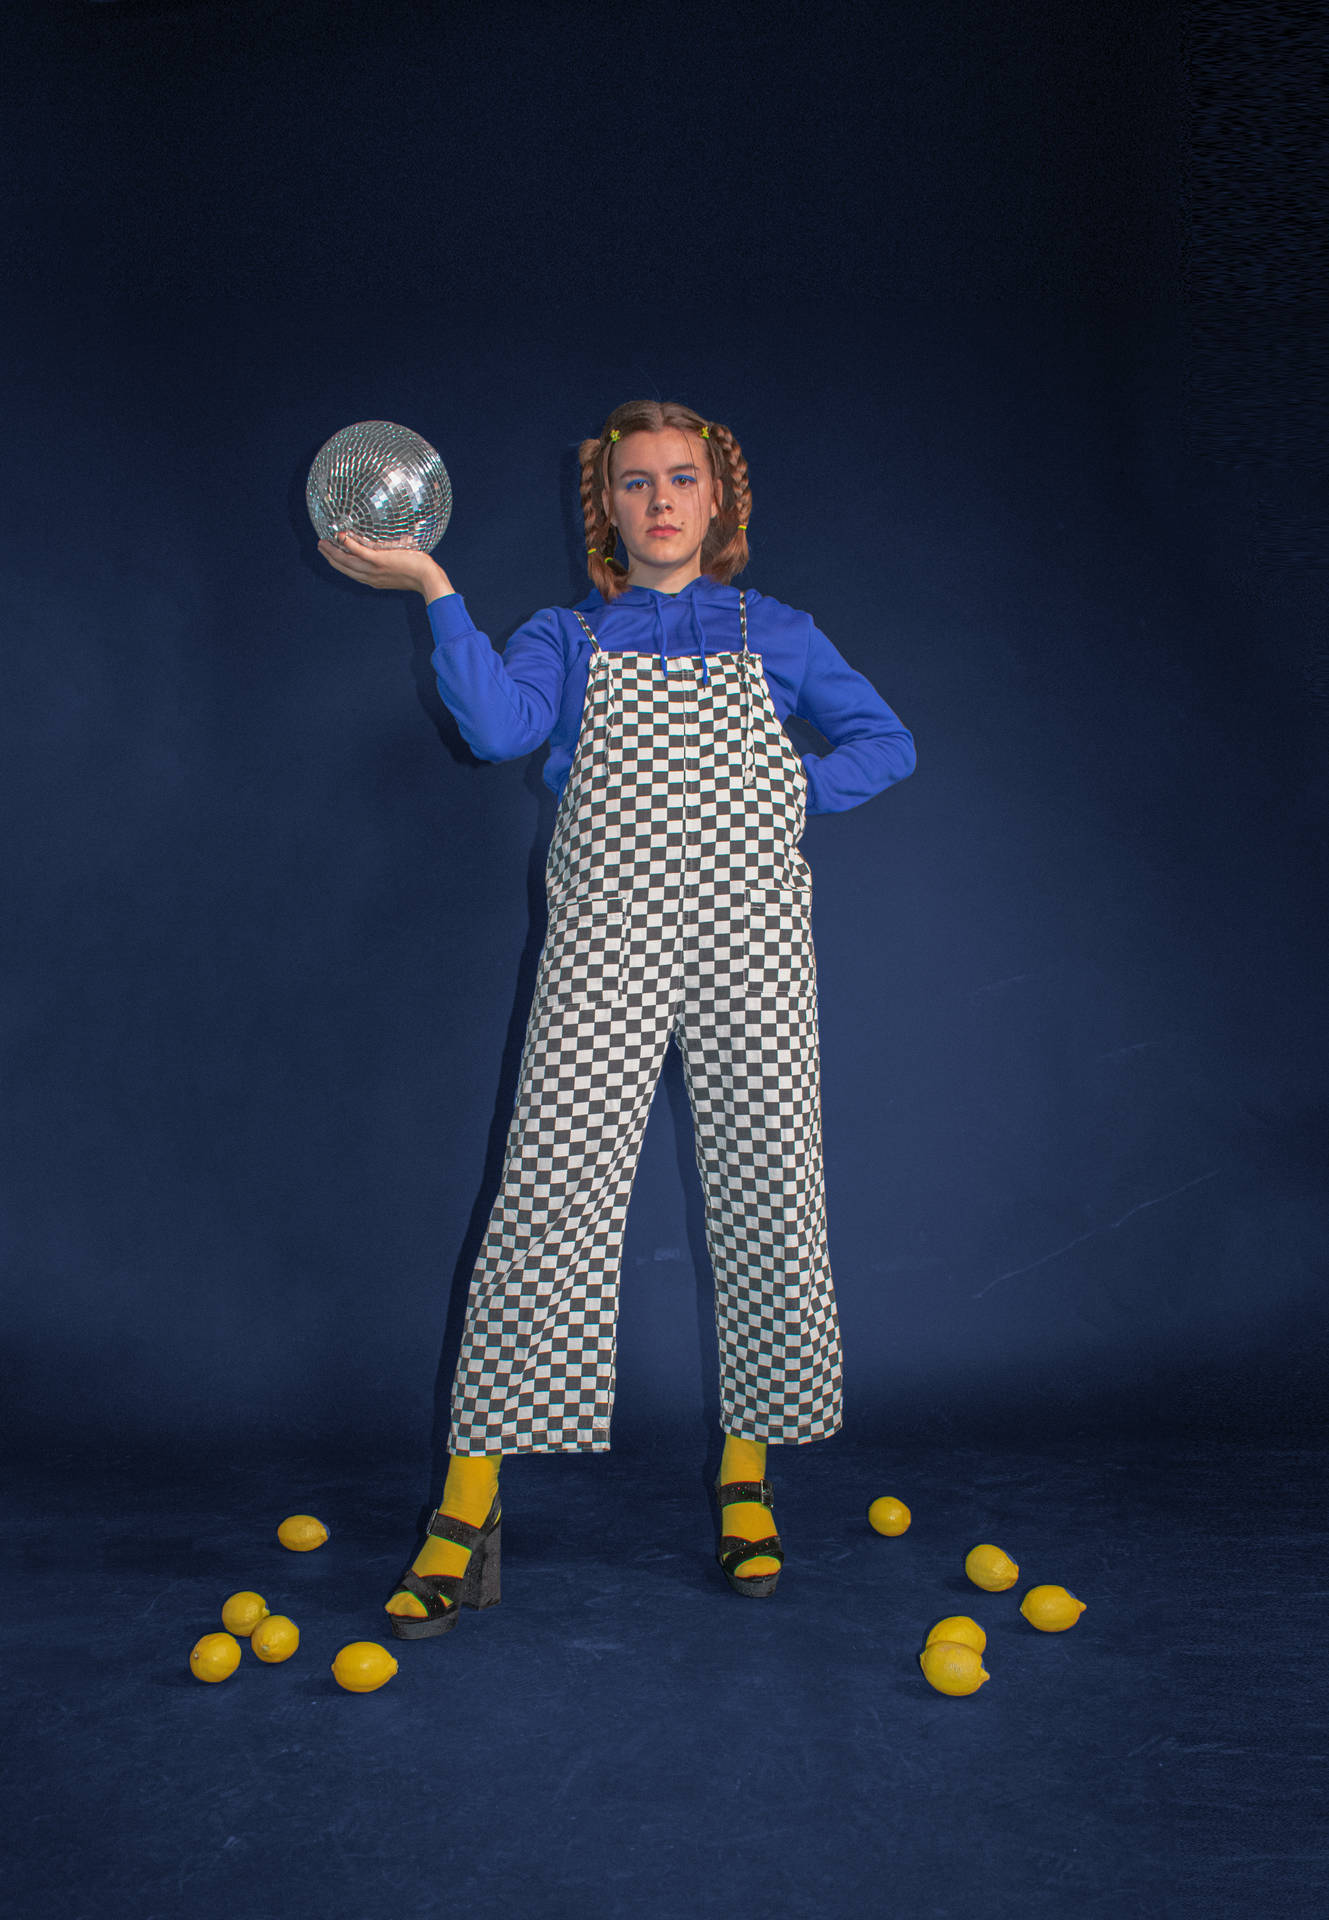 Woman In Checkered Jumpsuit Wallpaper